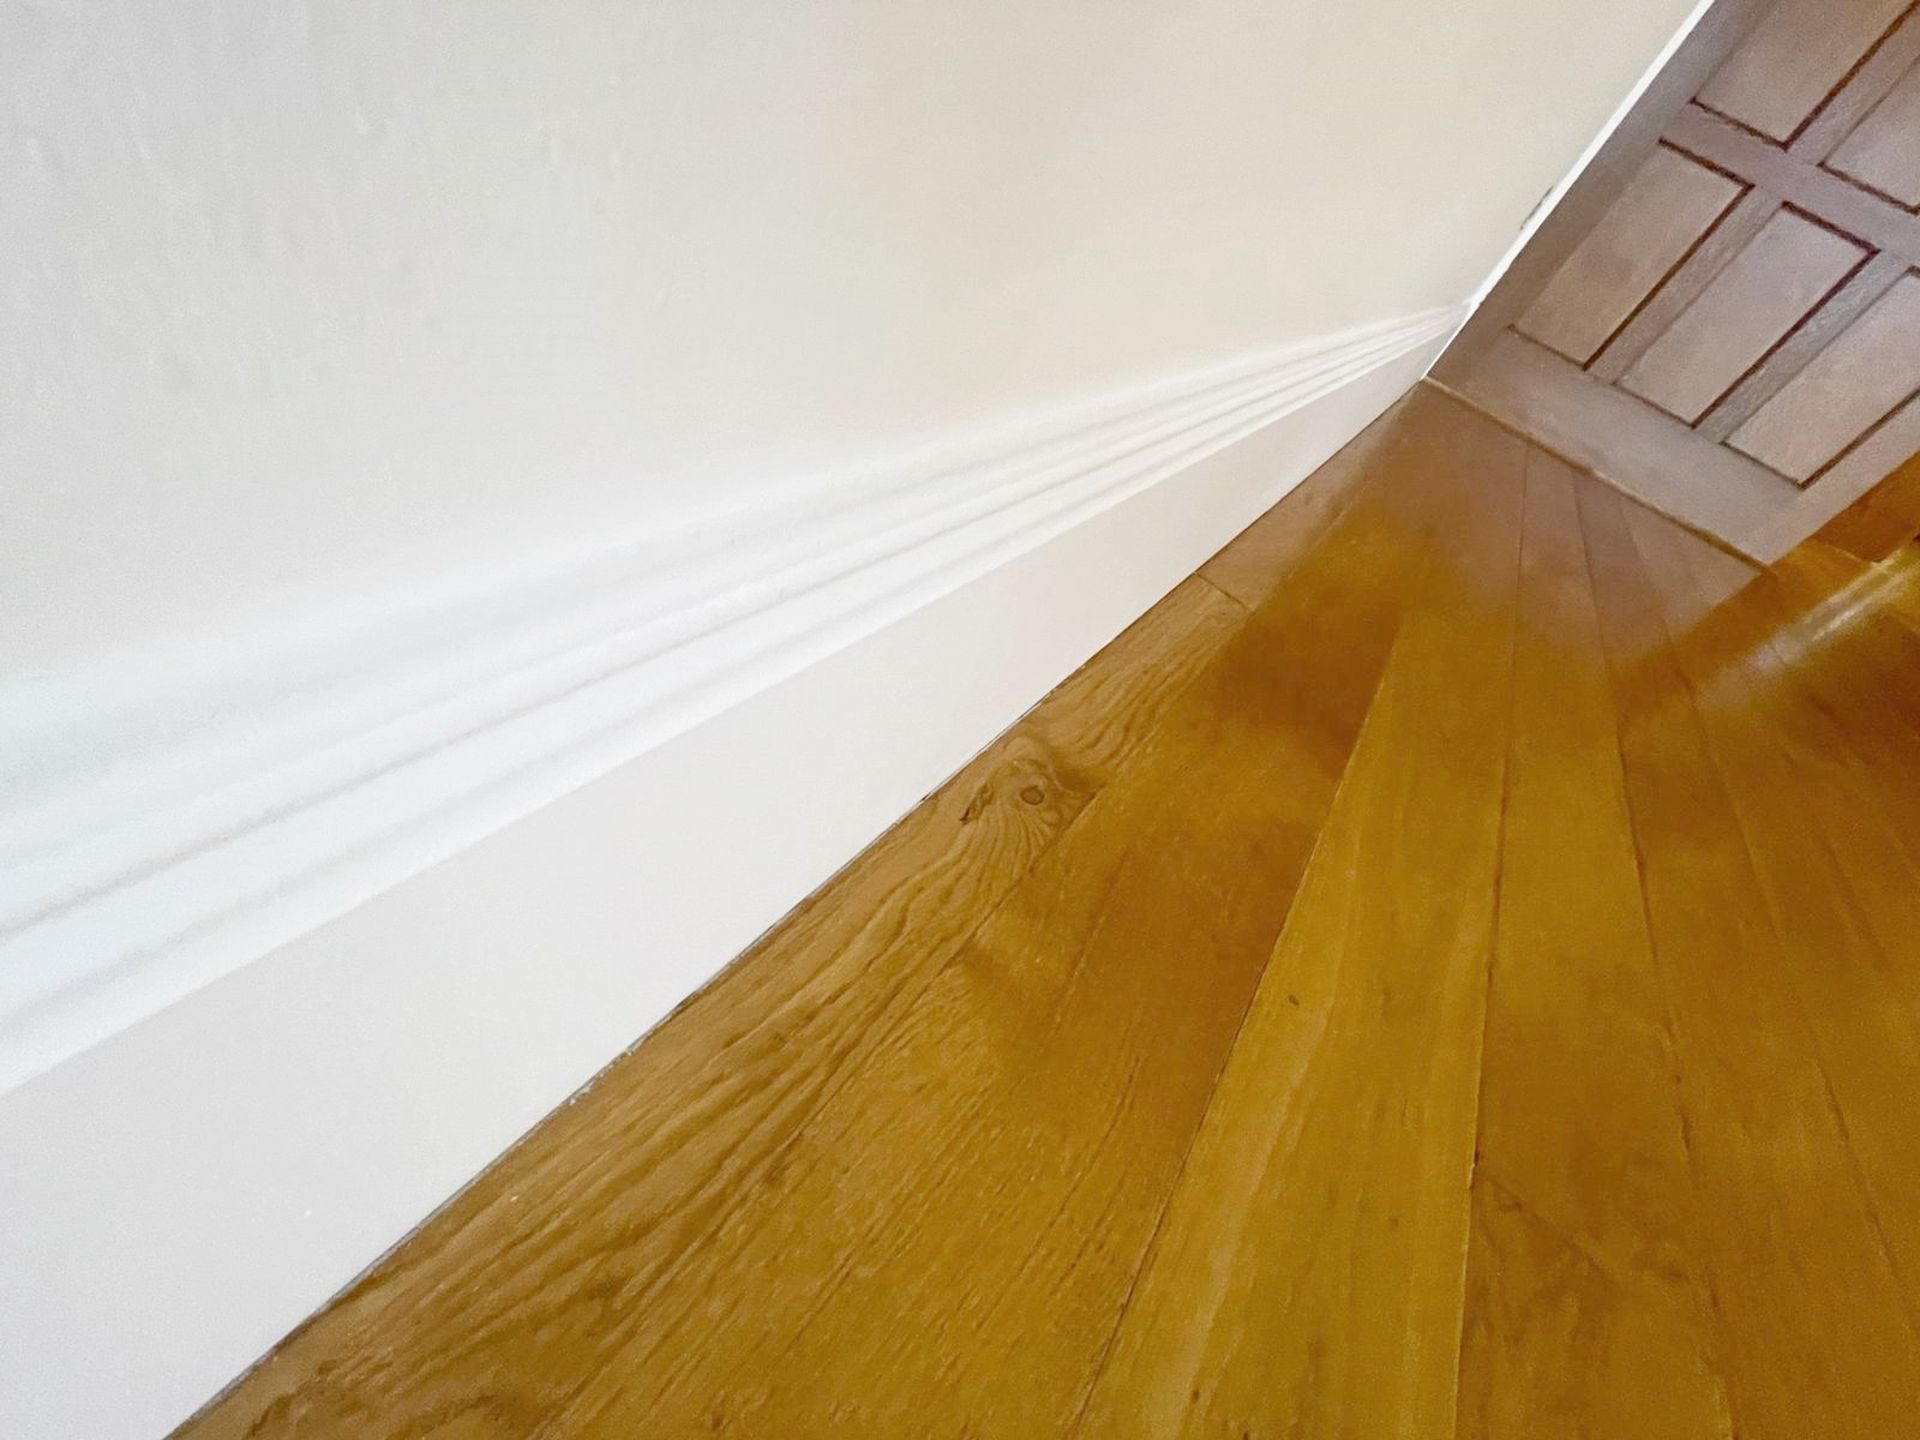 Approximately 17-metres of Timber Painted Skirting Boards in White, Height 23cm - Ref: PAN177 - Image 5 of 8